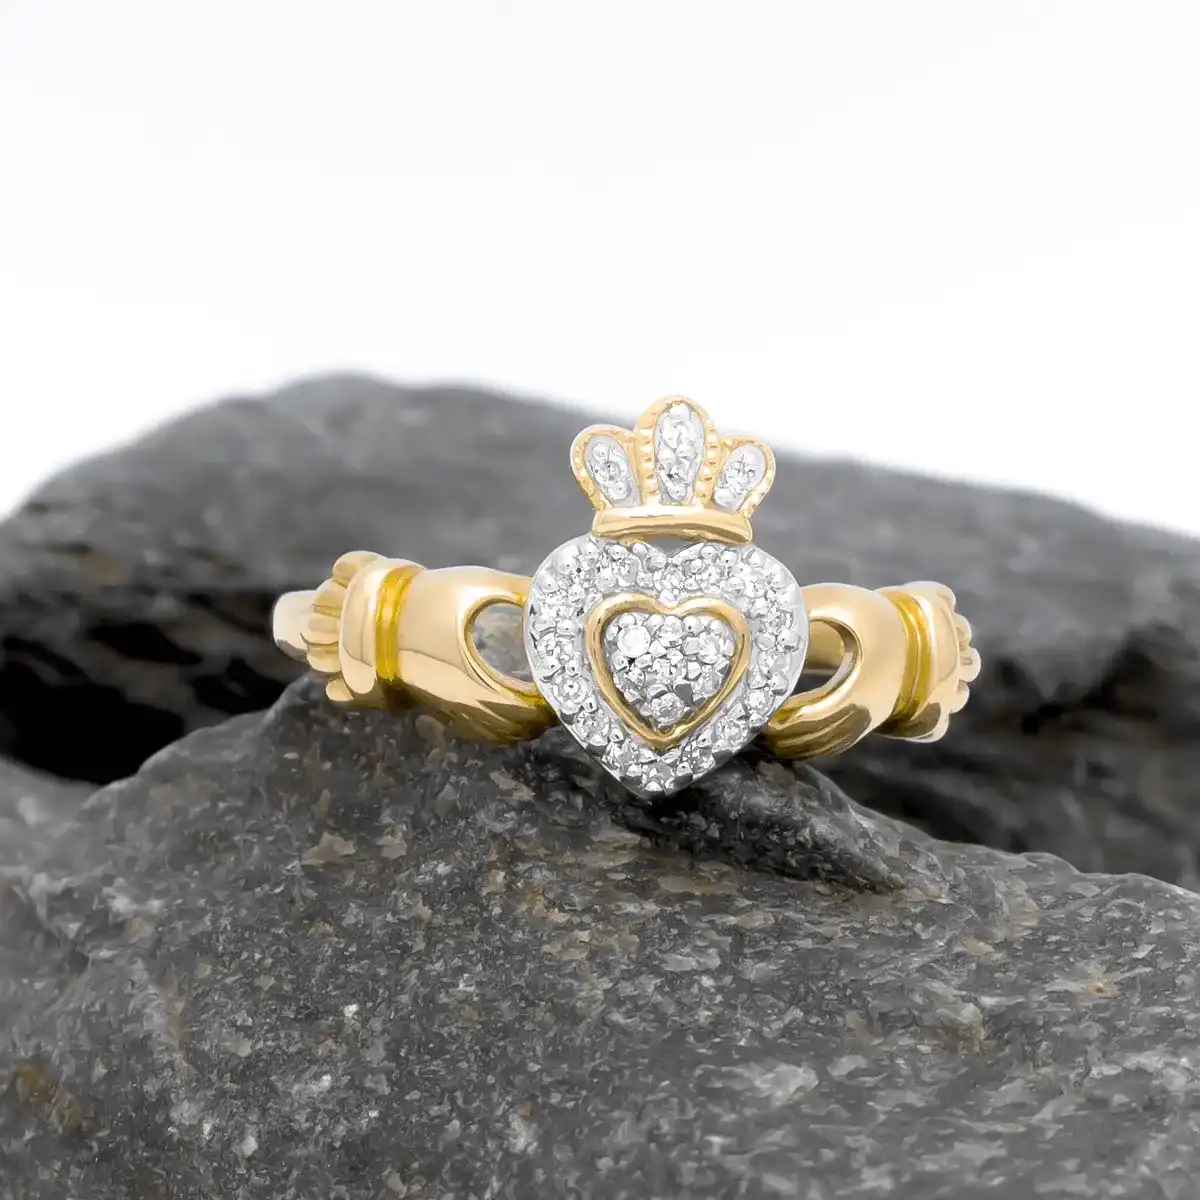 Product Review Exquisite Yellow Gold And Diamond Claddagh Ring 